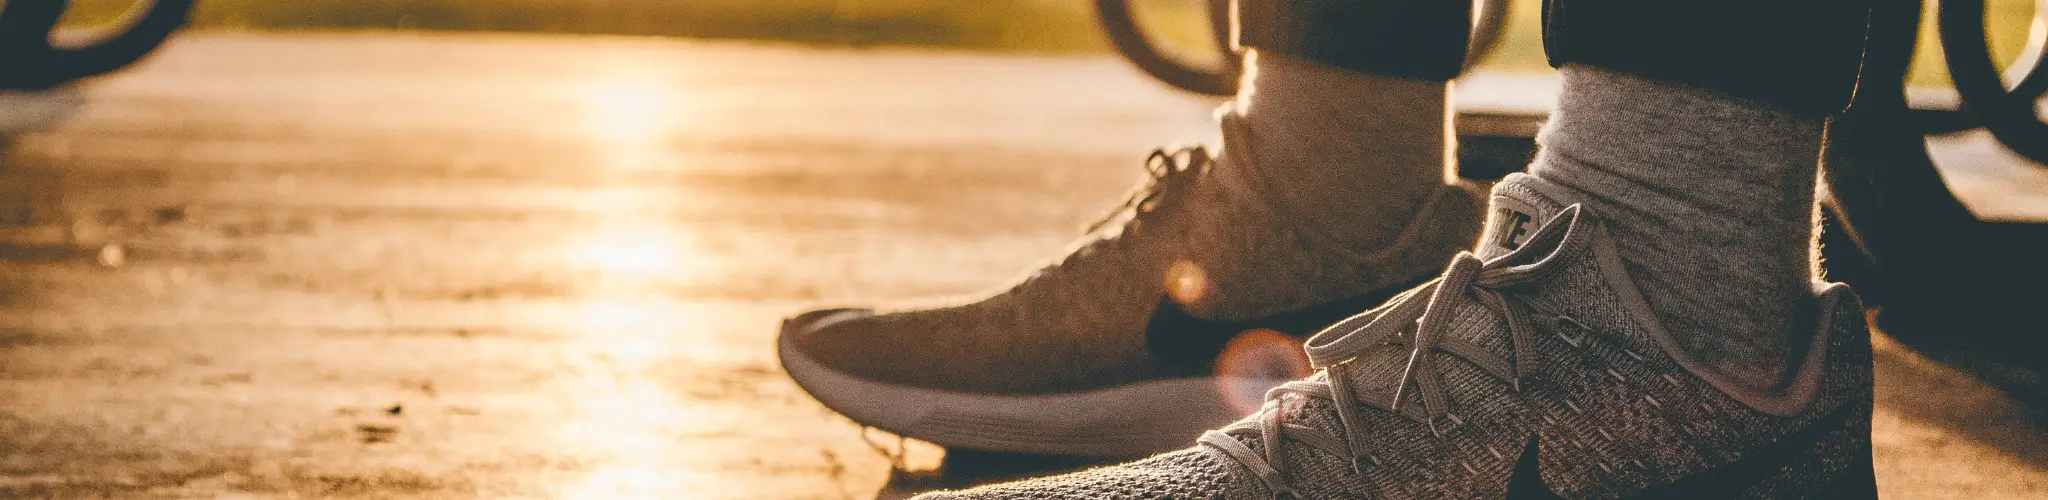 Stock photo of a person's feet in sneakers on an outdoor road.